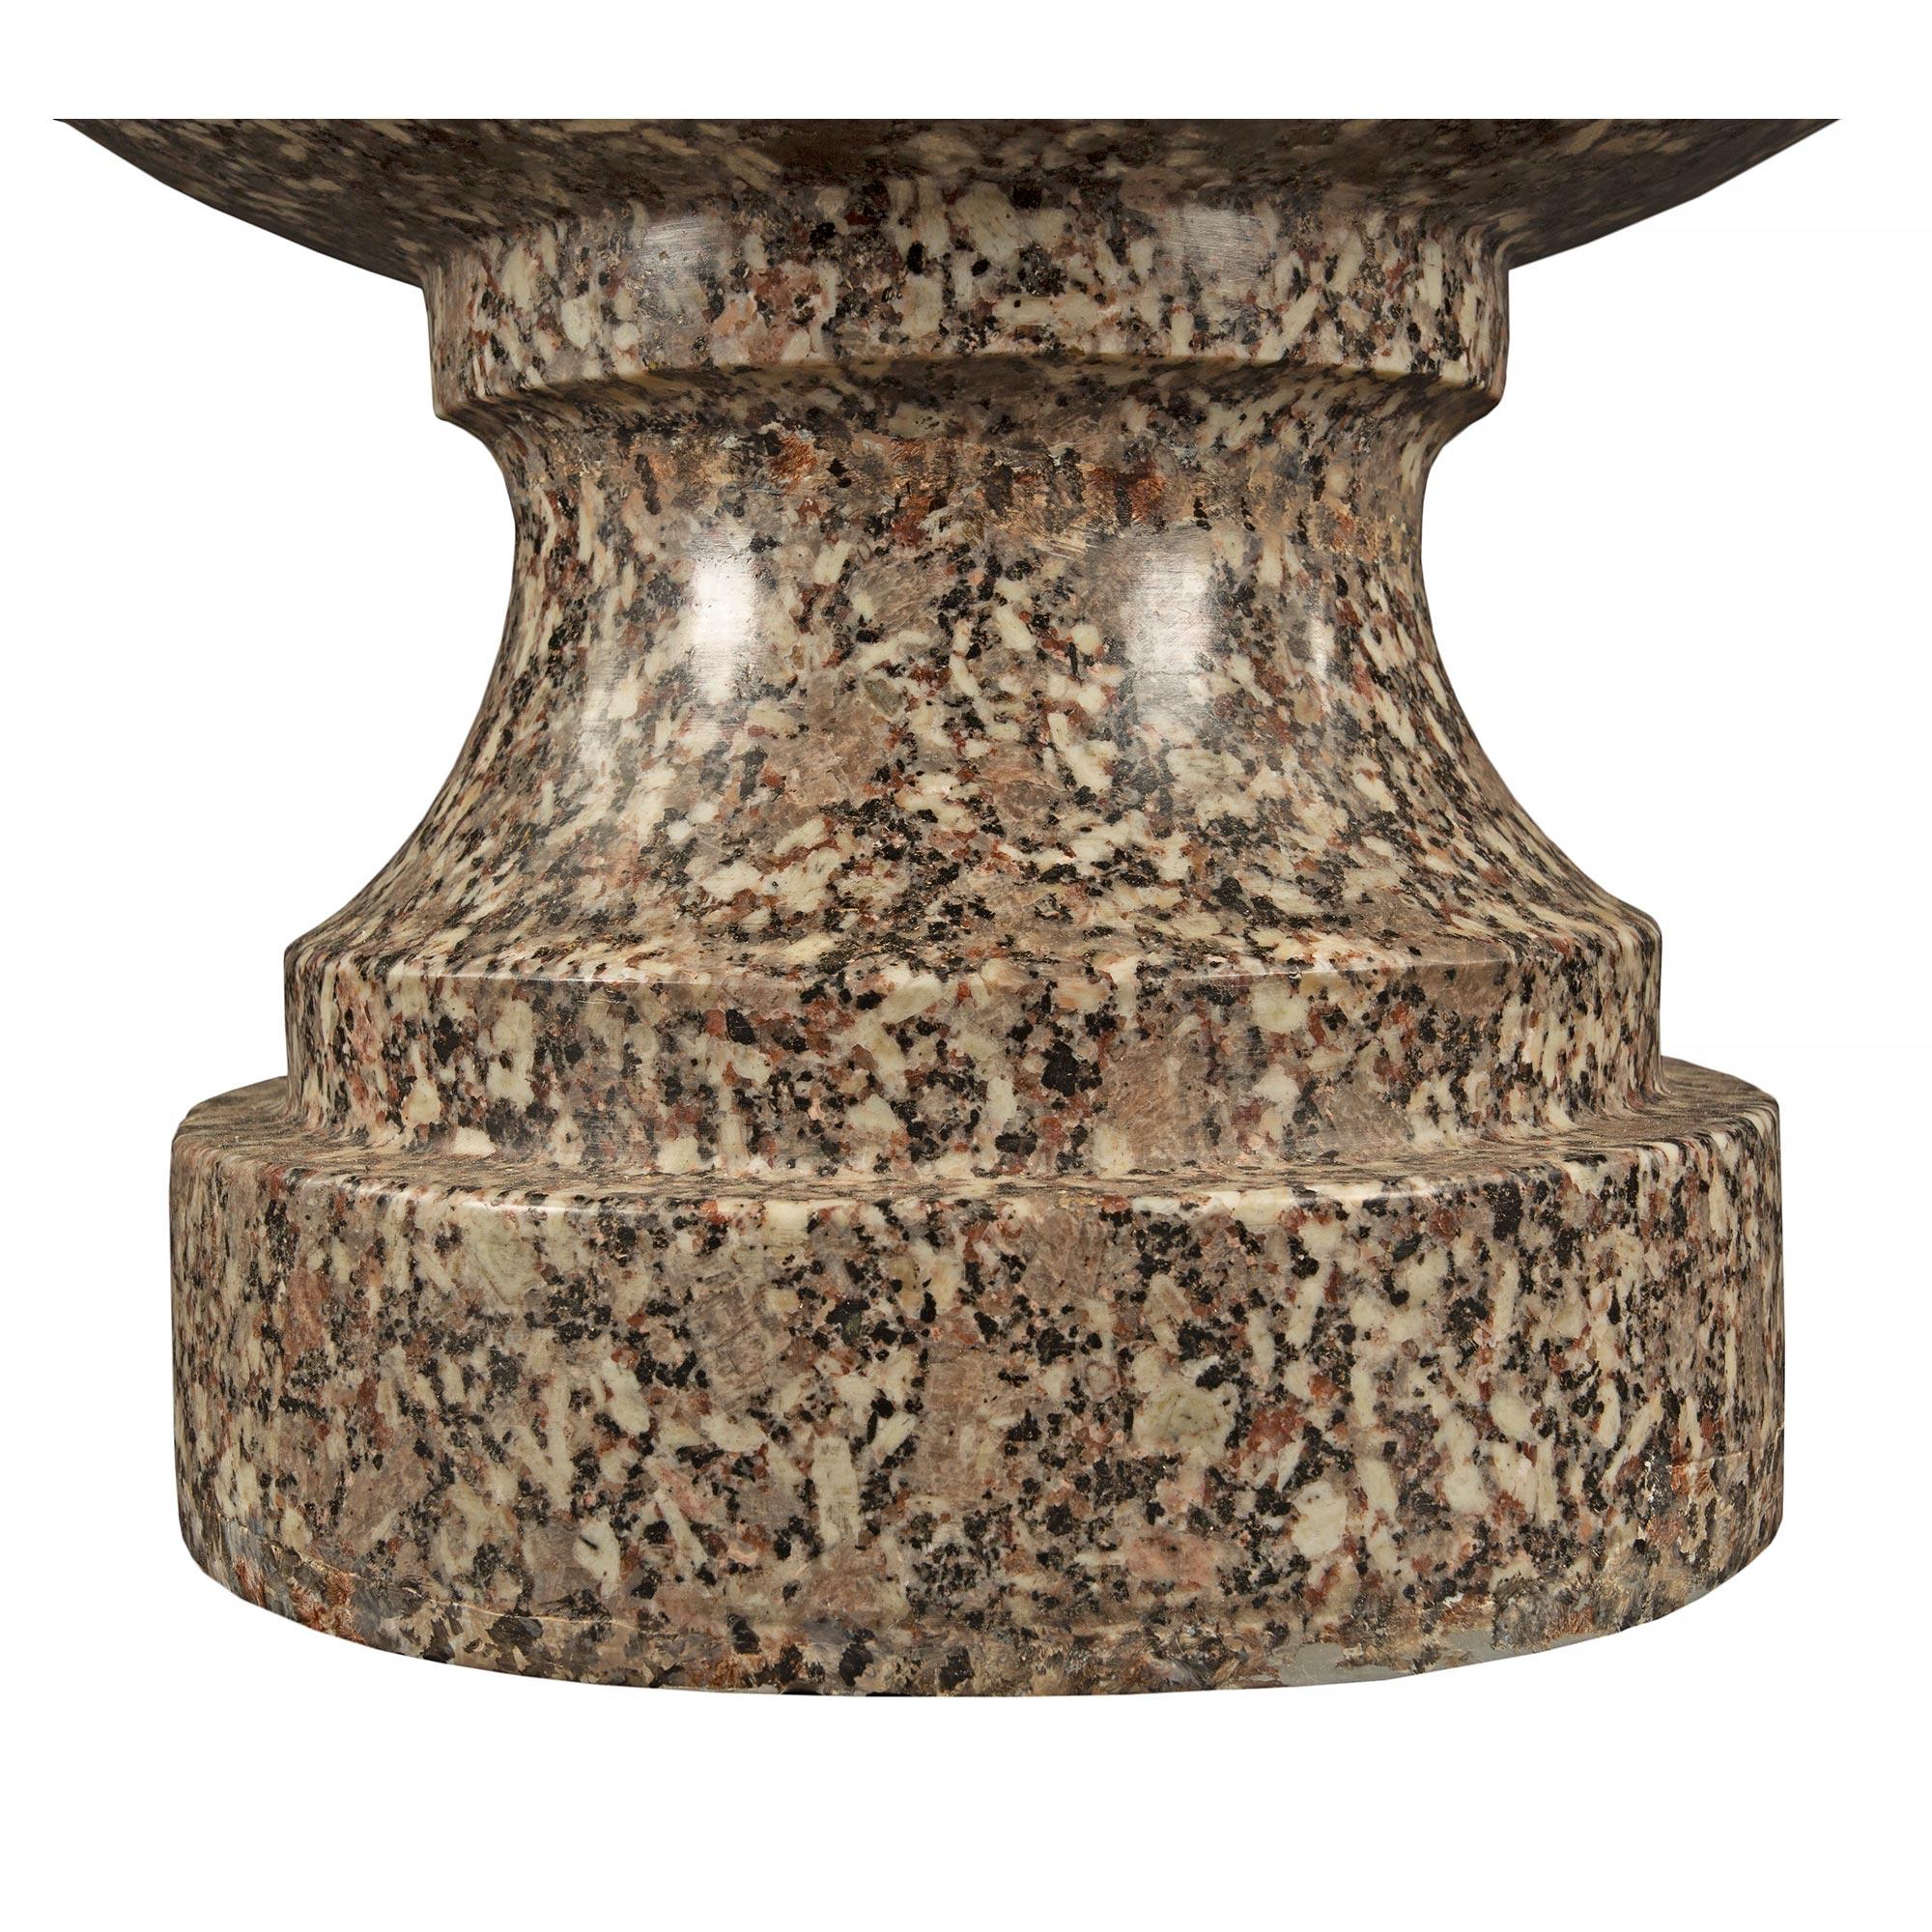 Pair of Italian 19th Century Neoclassical Style Granite Lidded Urns For Sale 3